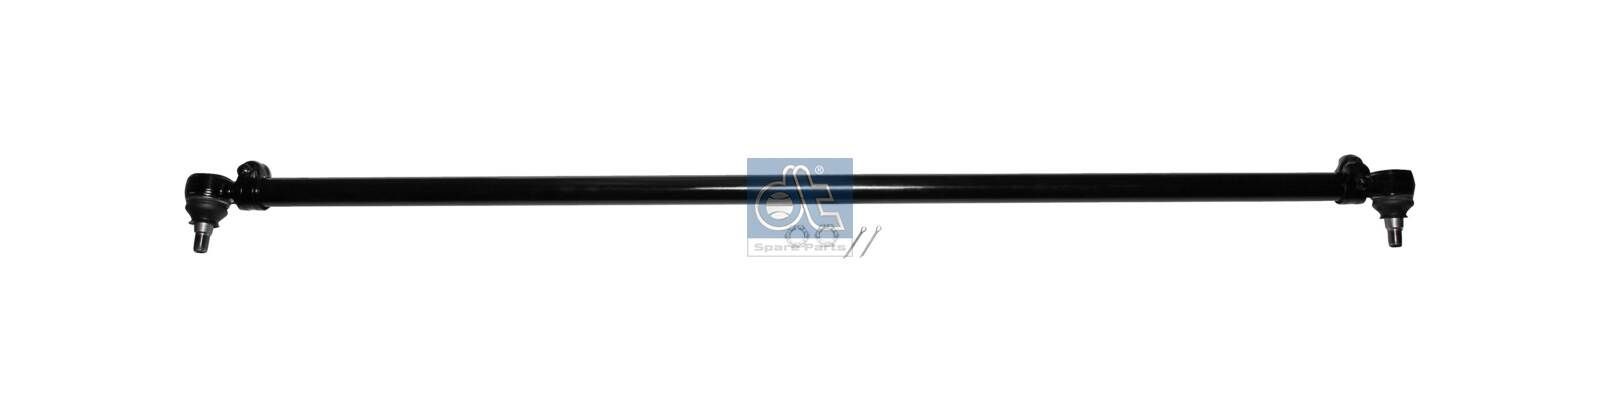 DT Spare Parts 5.22012 Rod Assembly 1 351 205